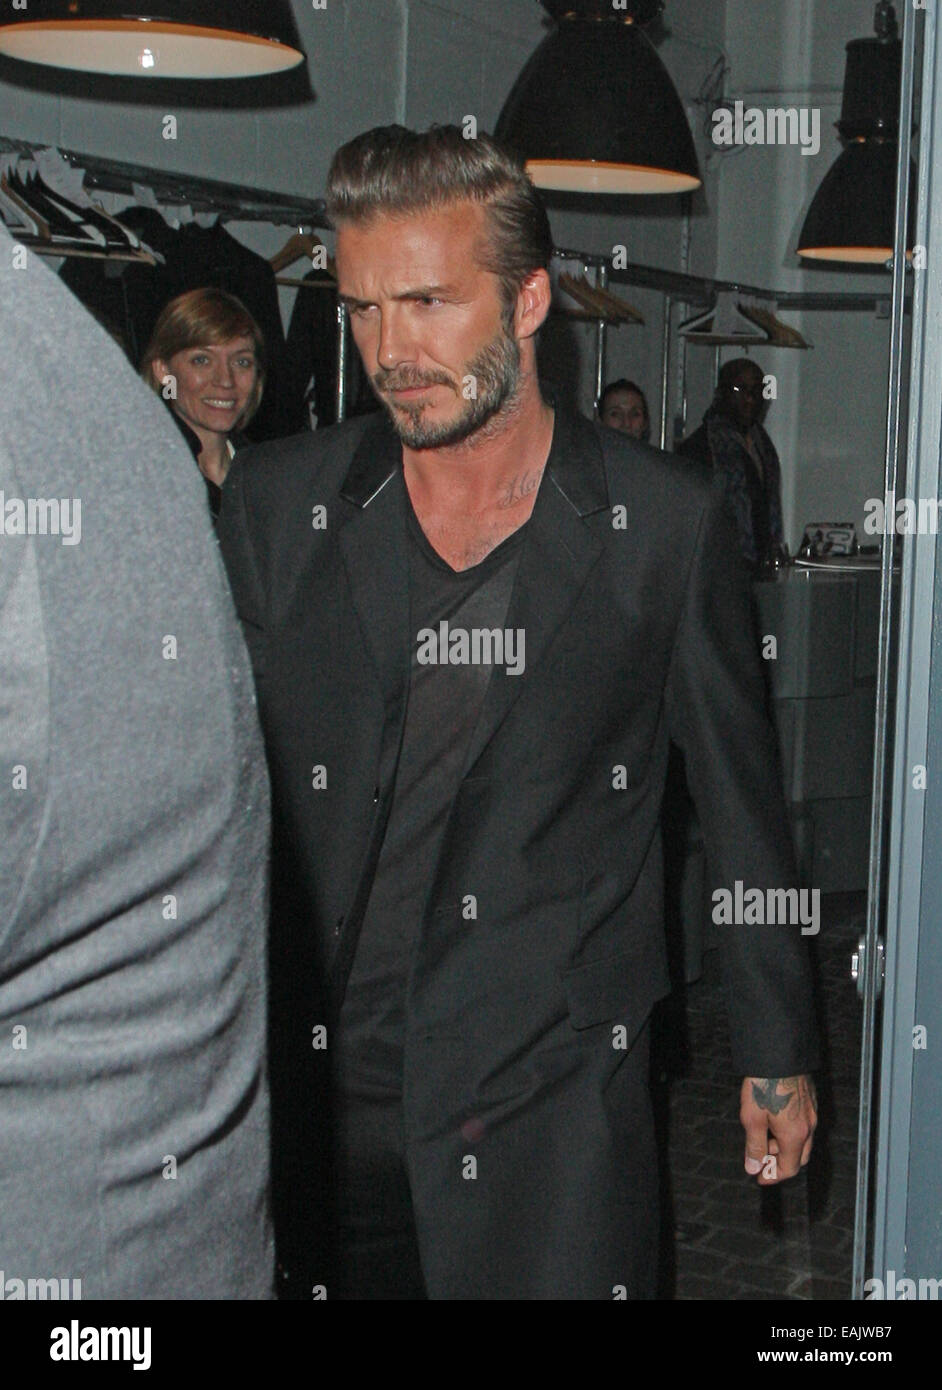 David Beckham H&M swimwear collection launch party at shoreditch house.  Ellie Gouilding, Niall Horan and Liam Payne were seen leaving the bash  along with david beckham himself. Featuring: David Beckham Where: London,